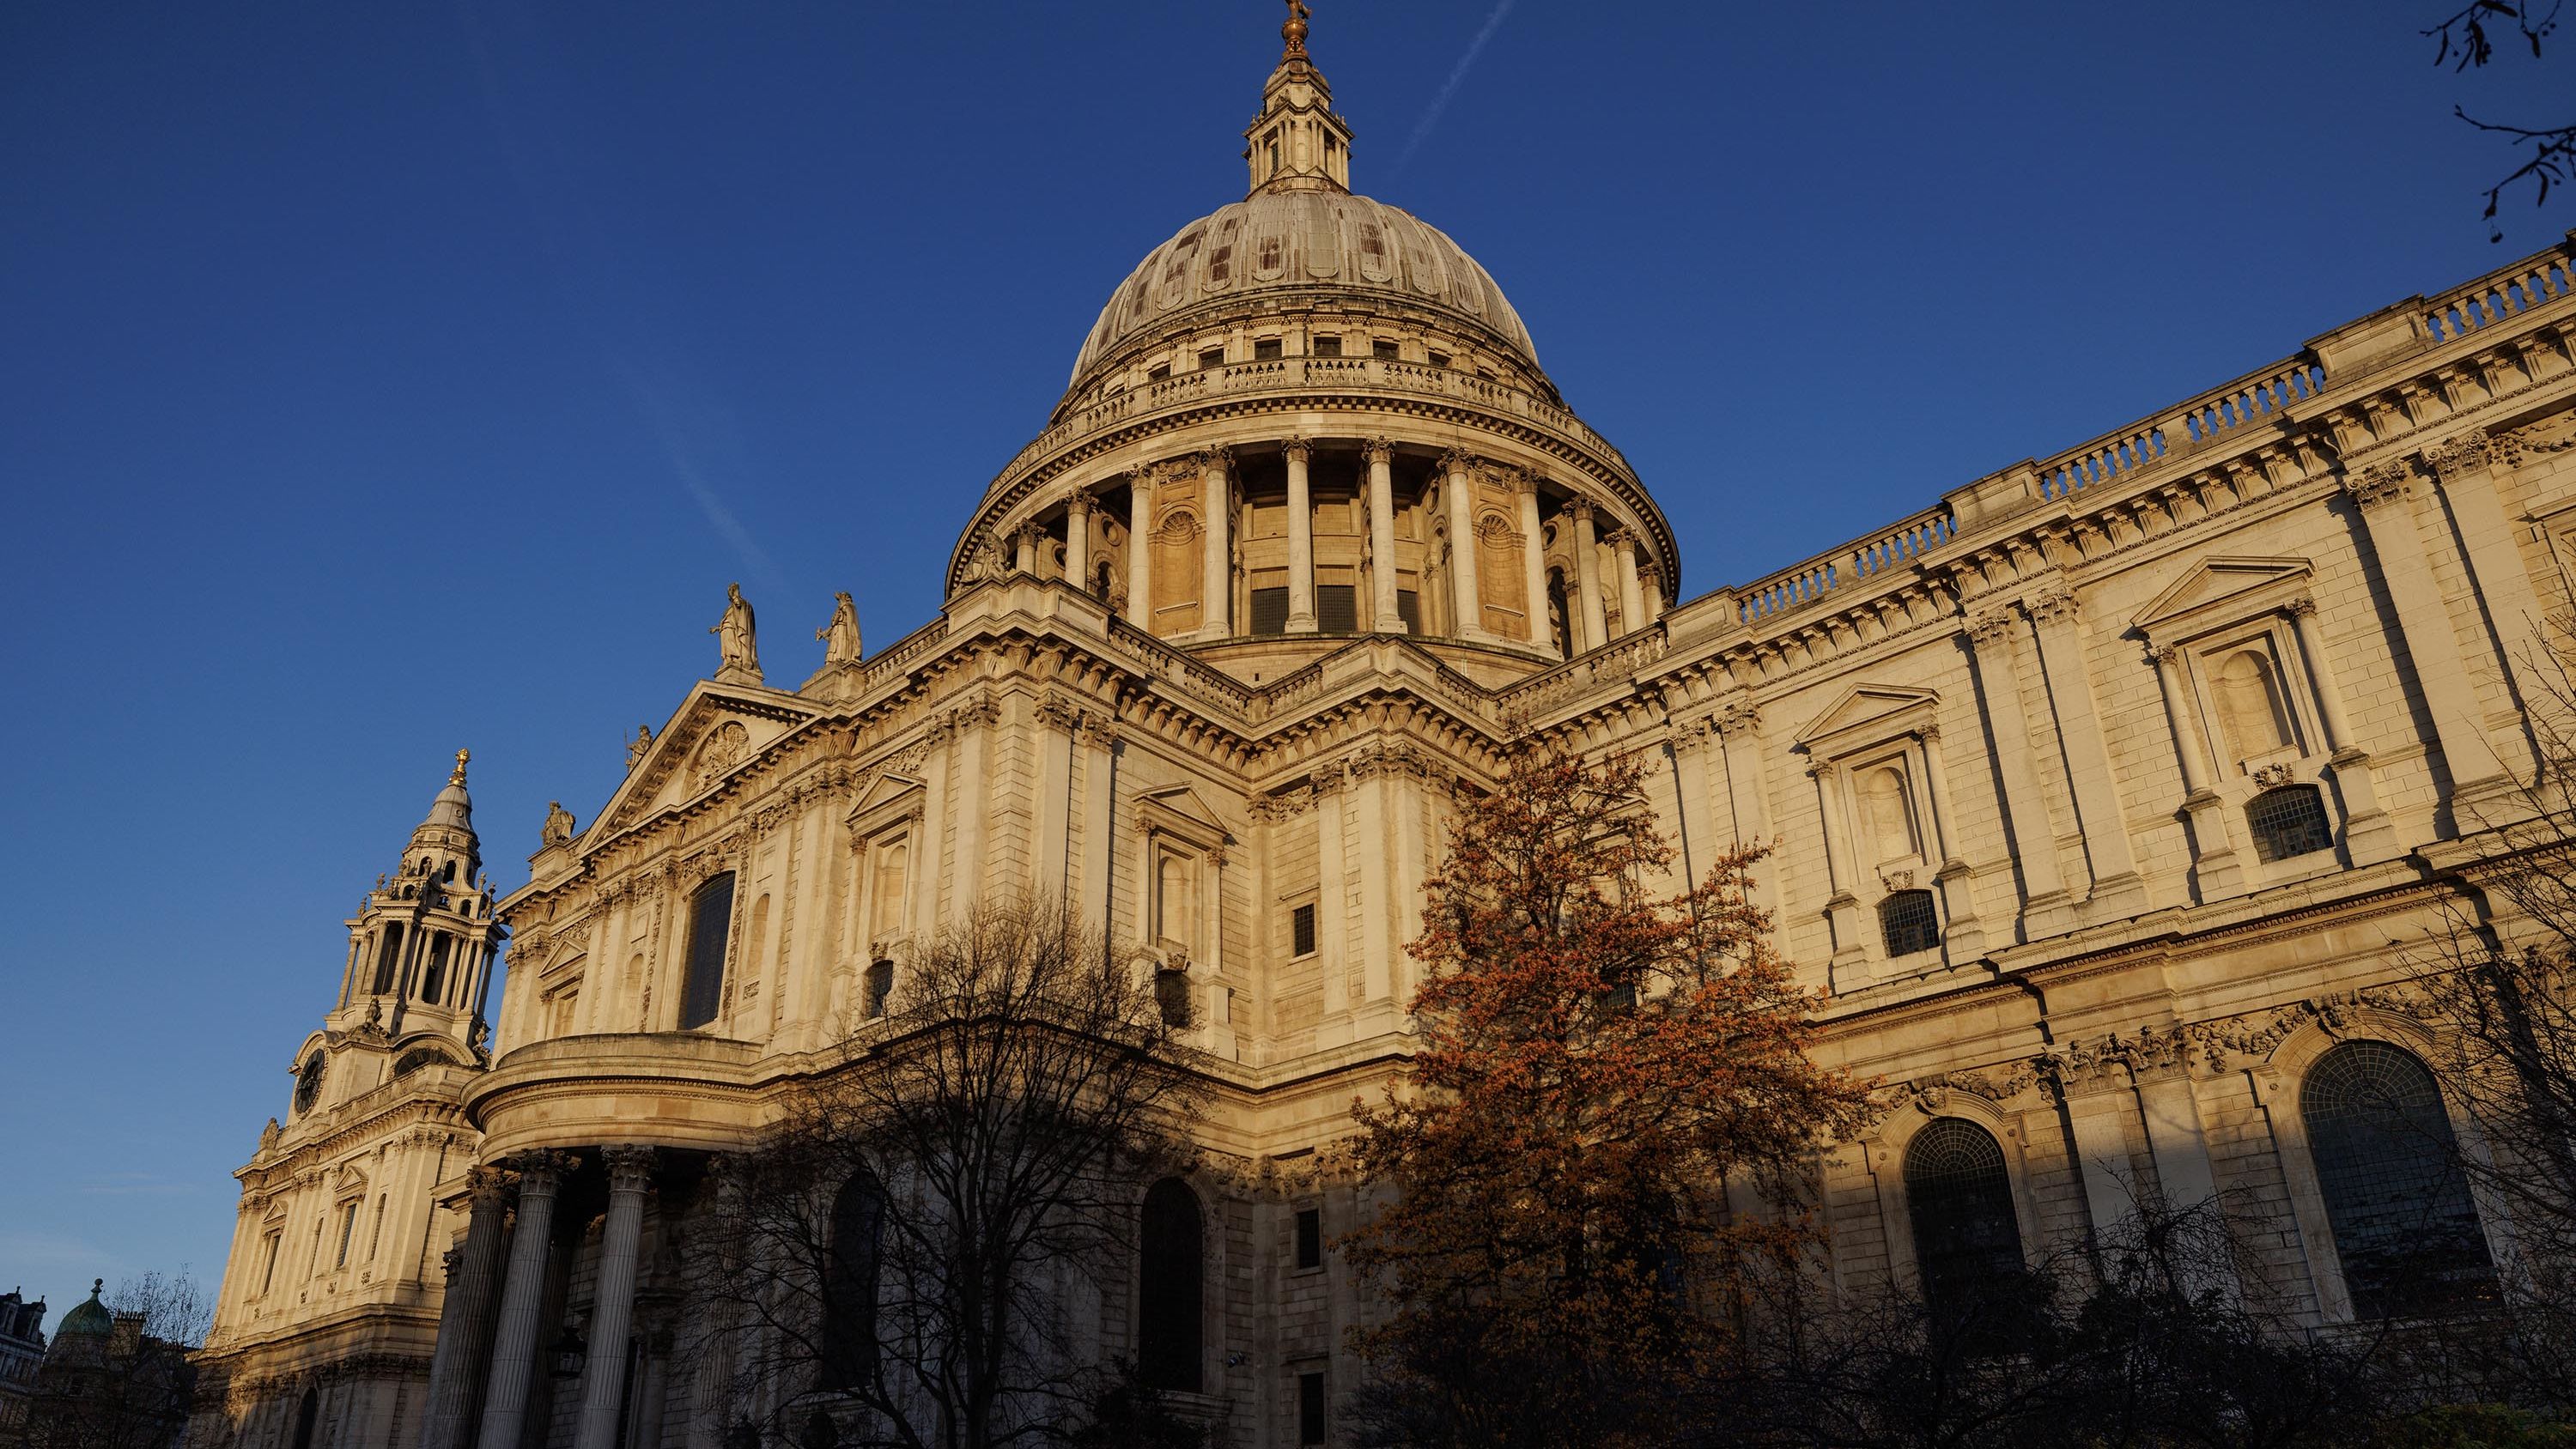 Two lucky guests will have the chance to sleep in St Paul's Cathedral - the first people to do so since World War II.